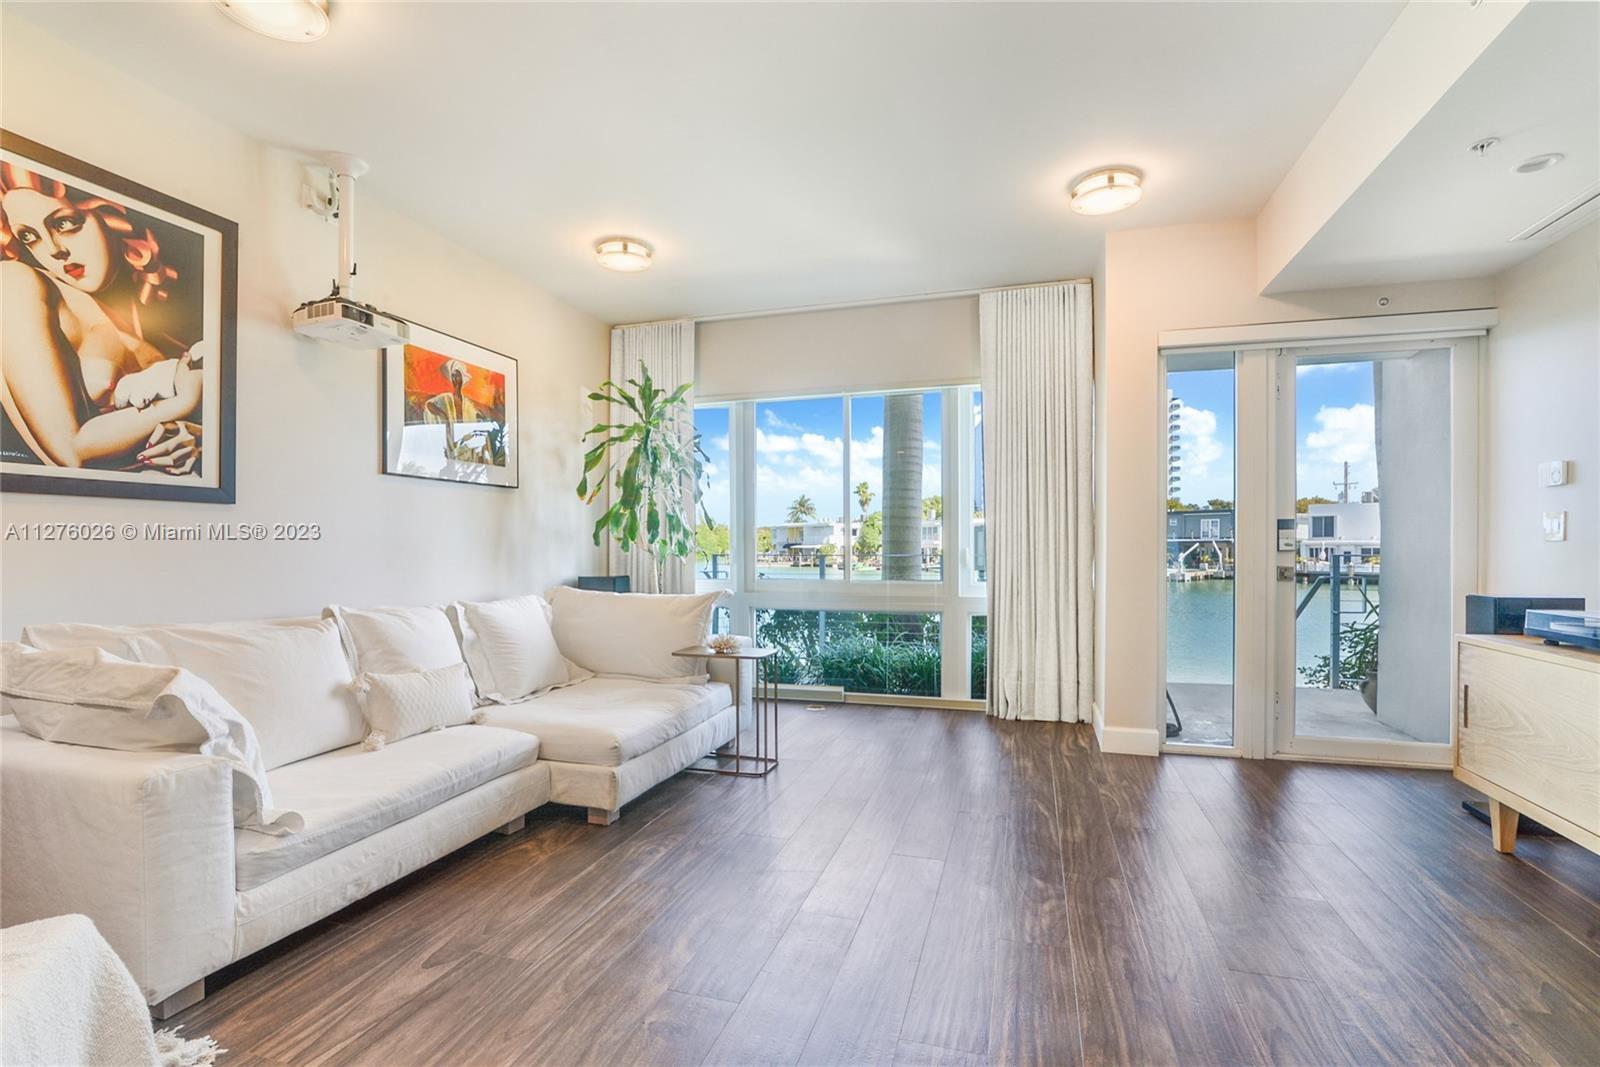 Spectacular Luxury Waterfront Townhome with Deeded Boat Dock and Lift. This 2015 Modern 4bed/4.5bath gem with 2022 upgrades features a Private Rooftop Terrace with Summer Kitchen and Intracoastal Turquoise Water Views, Lounge with cinema/entertainment system, private elevator, 2 car garage, EV Fast Charger, Savant Smart Home system, DICA Kitchen, Miele appliances, Cafe refrigerator. Italian ceramic floors, and California Closets. Water purification, and softener, wind sensor retractable awning. Hardwired internet, Nest, Ring security. Normandy Shores boasts a golf course, tennis courts, children's playground, outdoor gym and clubhouse dining. Iris On The Bay is a few blocks to the beach, dining and shopping.